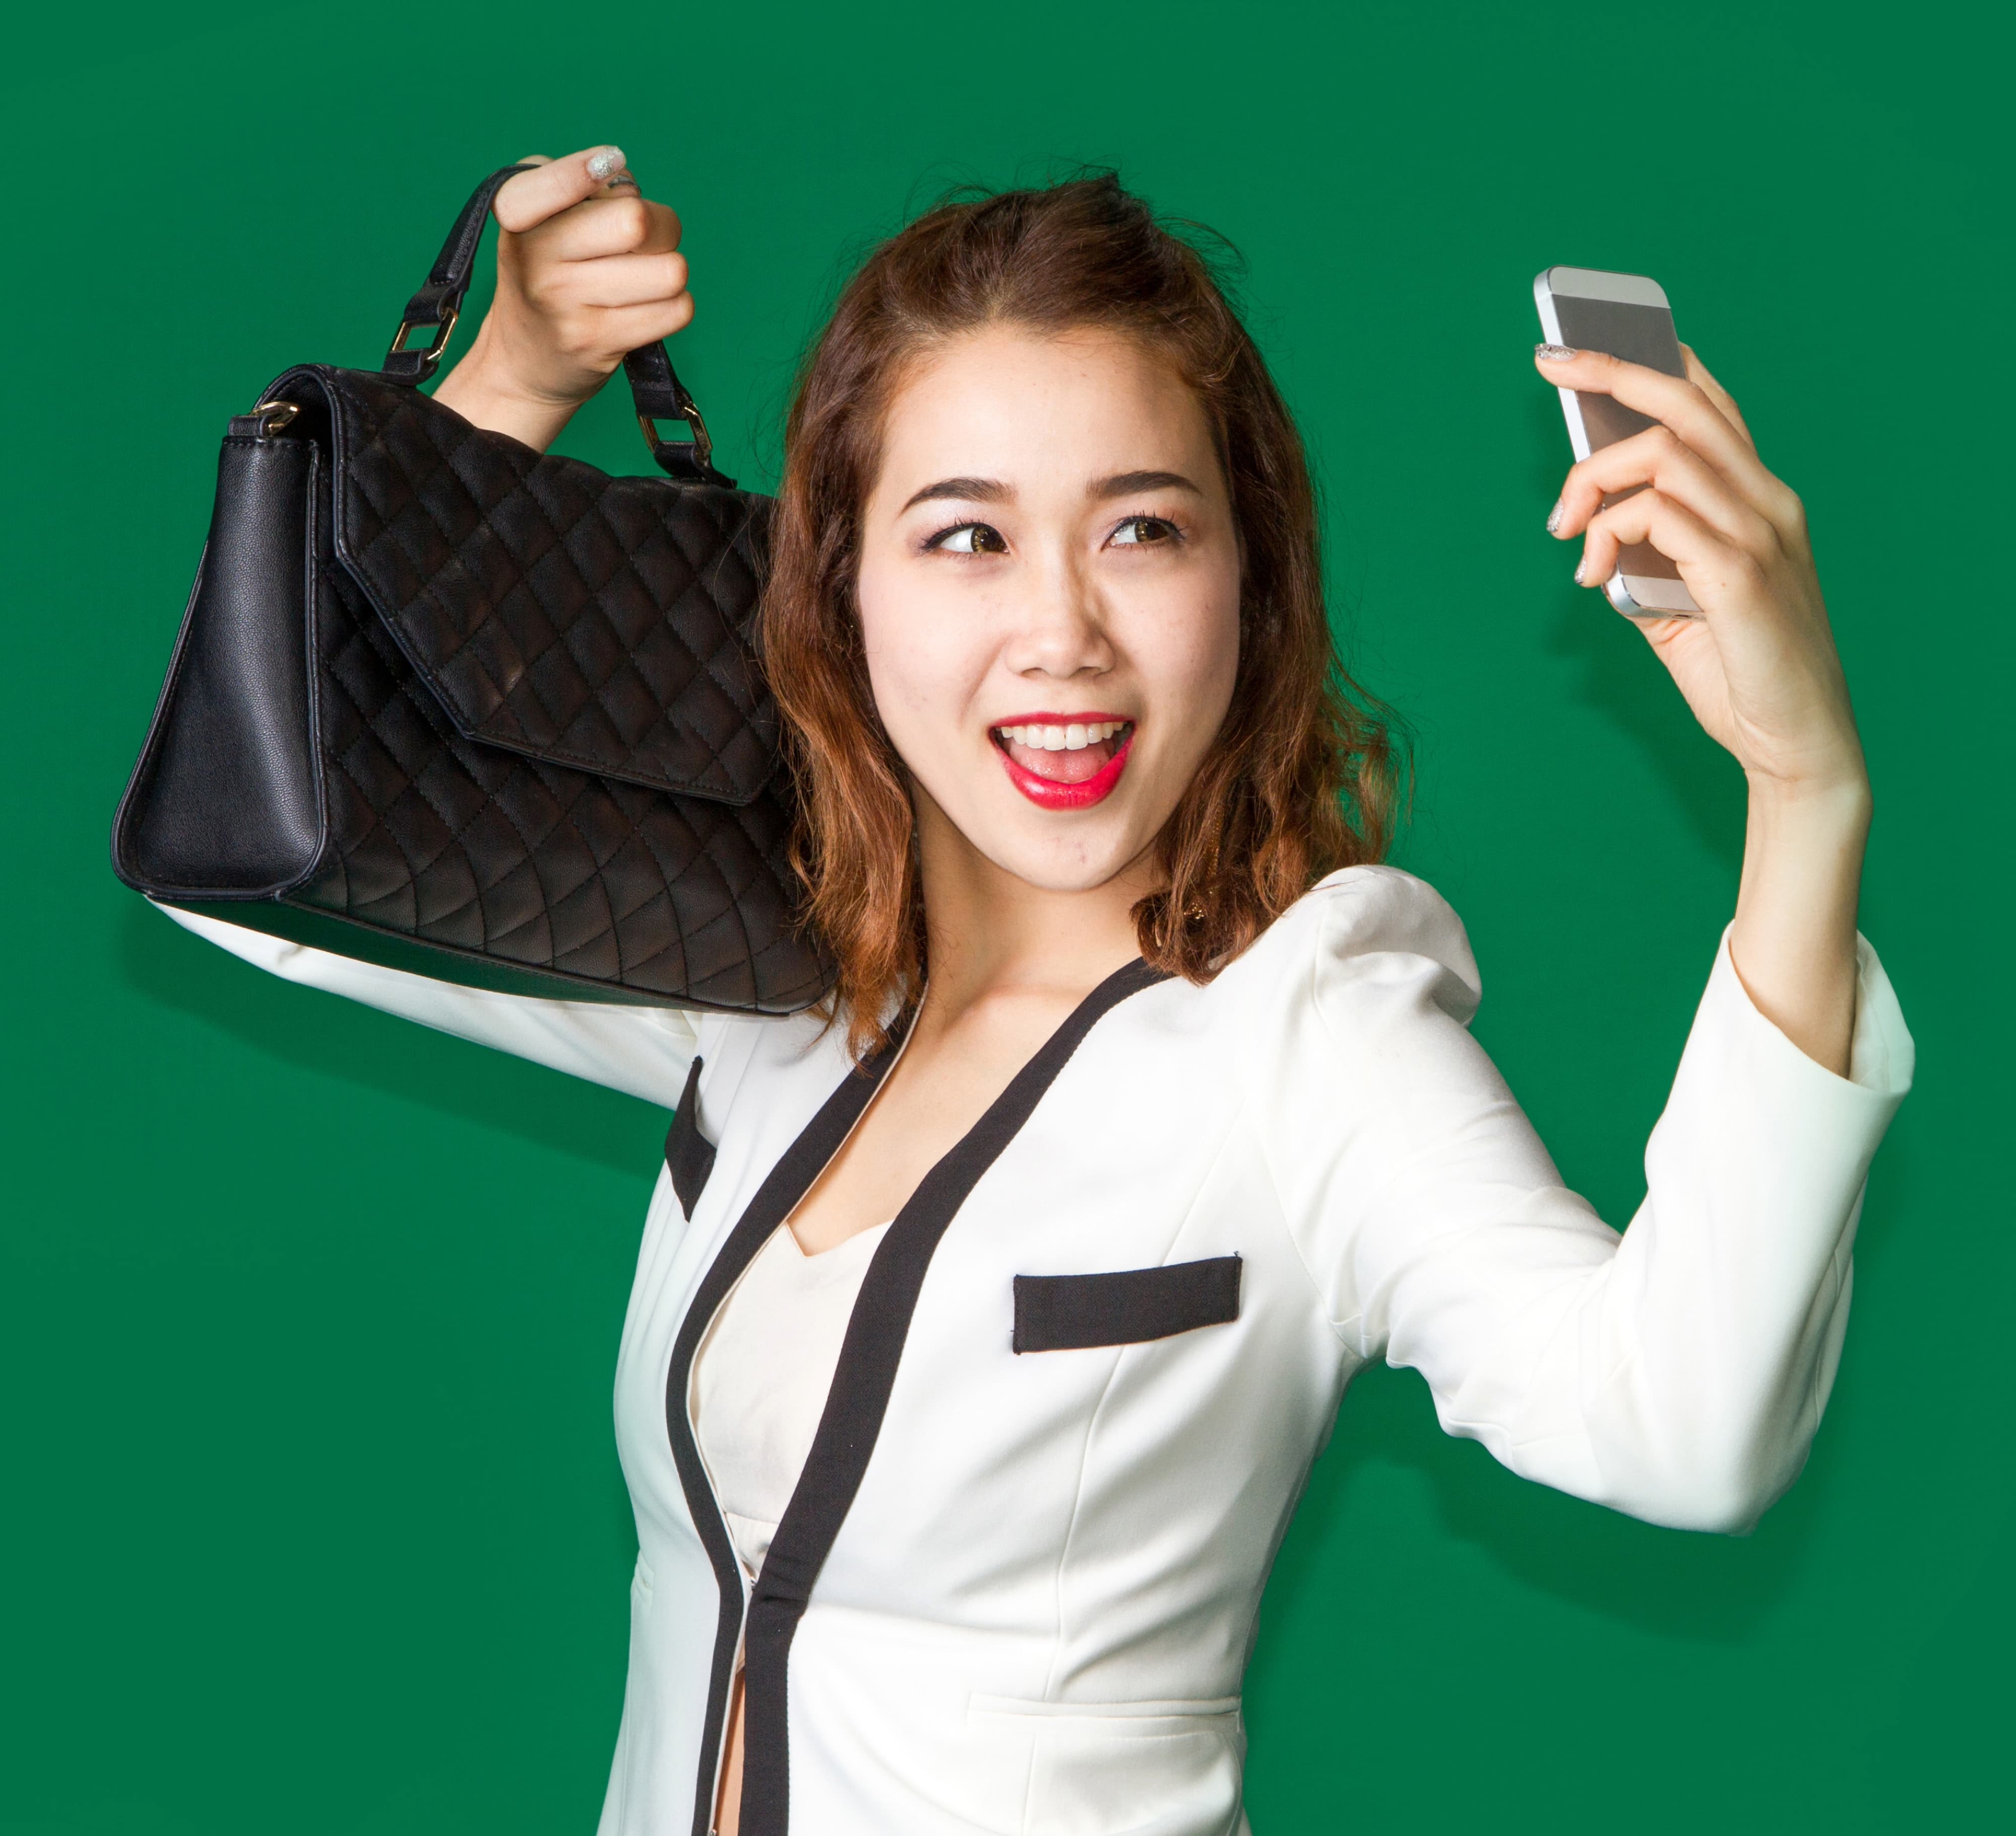 Lady show off her new purse by mobile phone